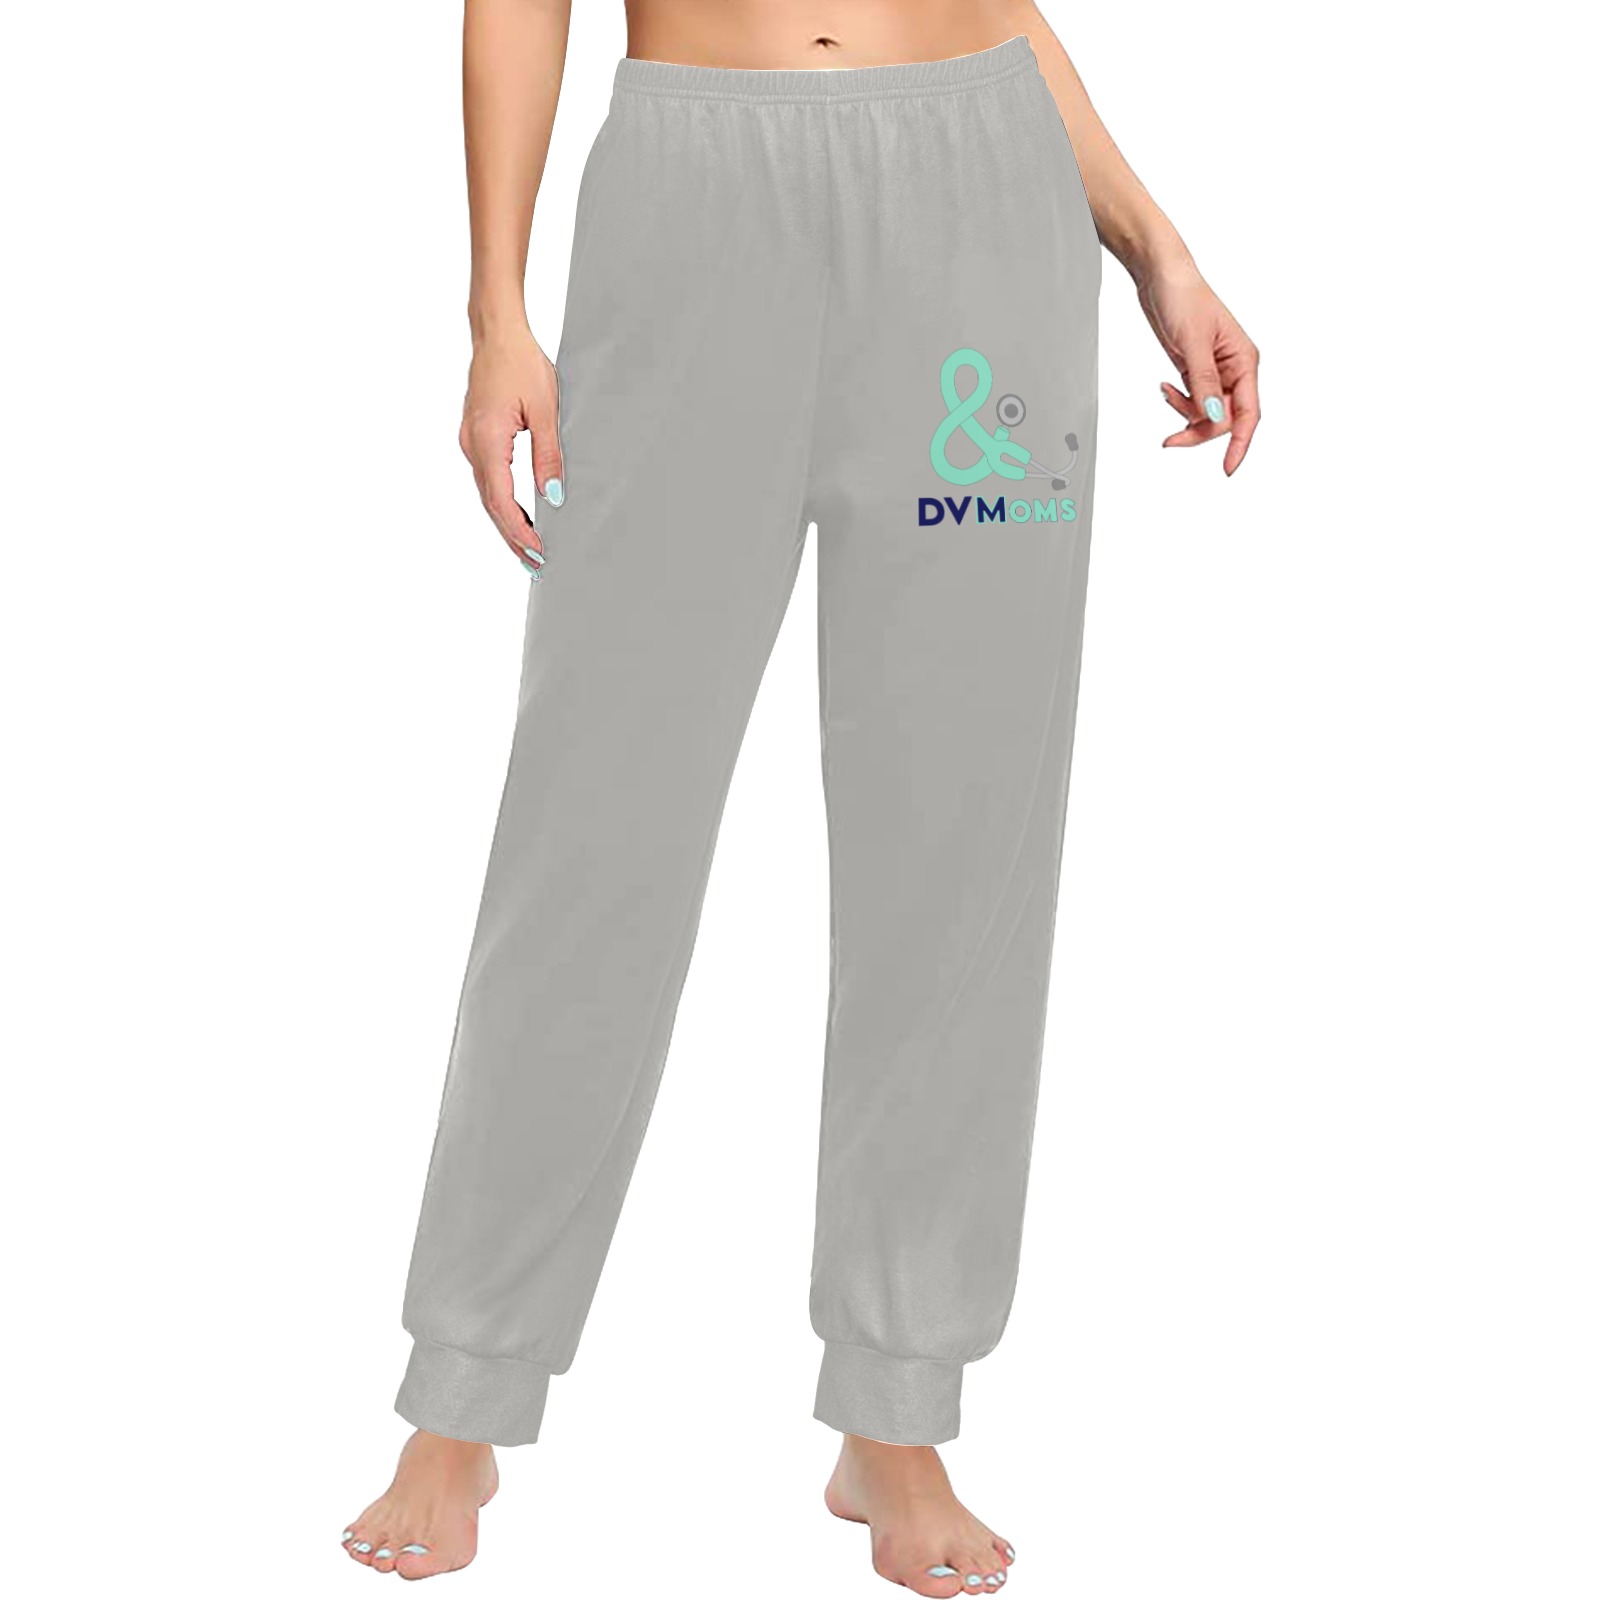 Pants gray with single logo Women's All Over Print Pajama Trousers